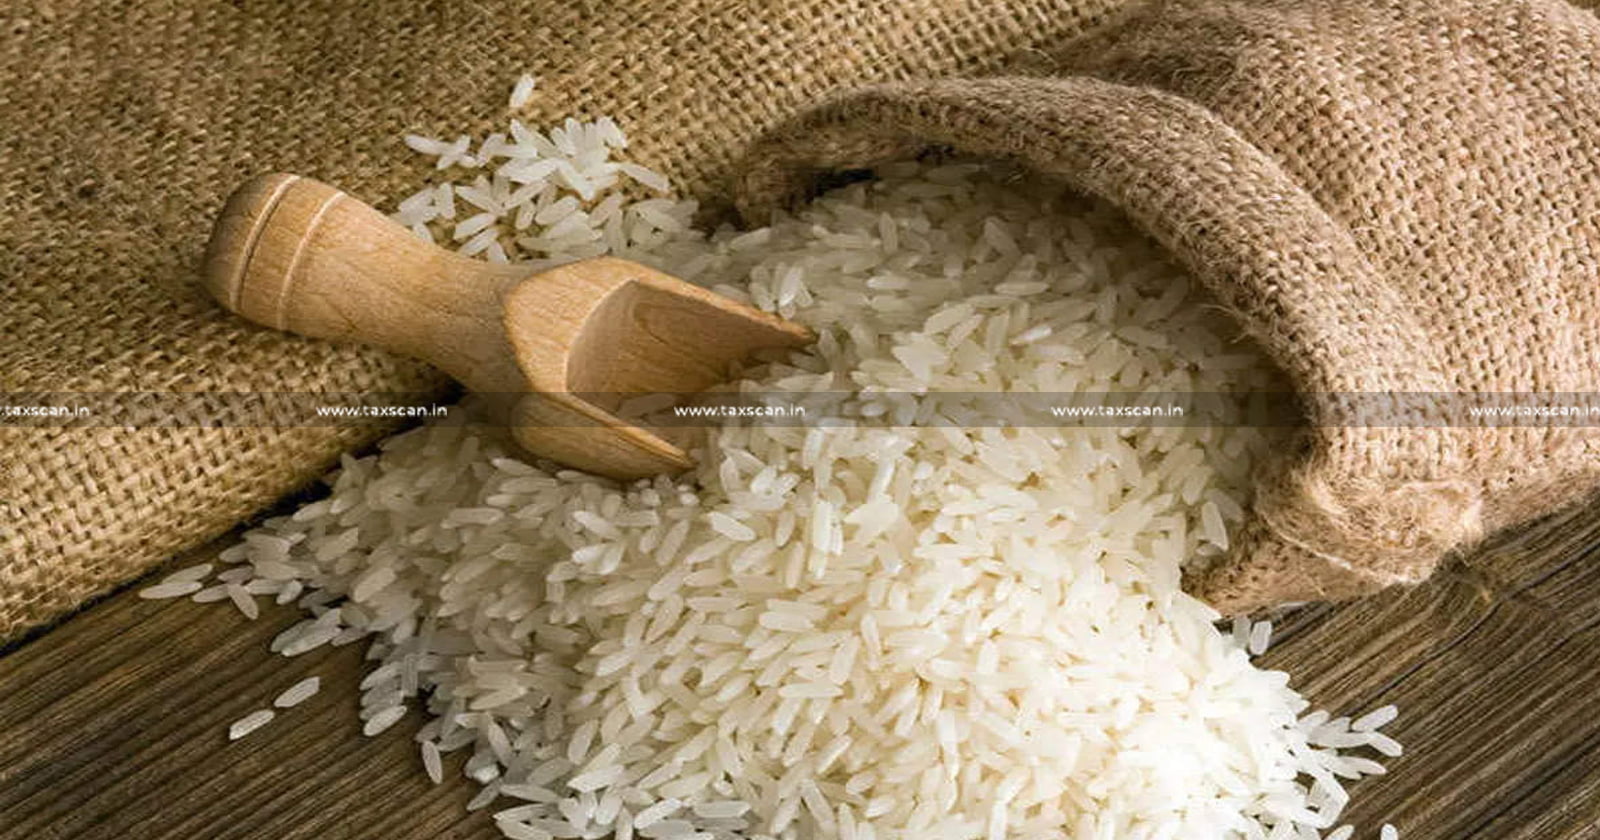 Central Govt - Export Duty of Rice - paddy - rough - seed quality -Rice in the Husk - taxscan